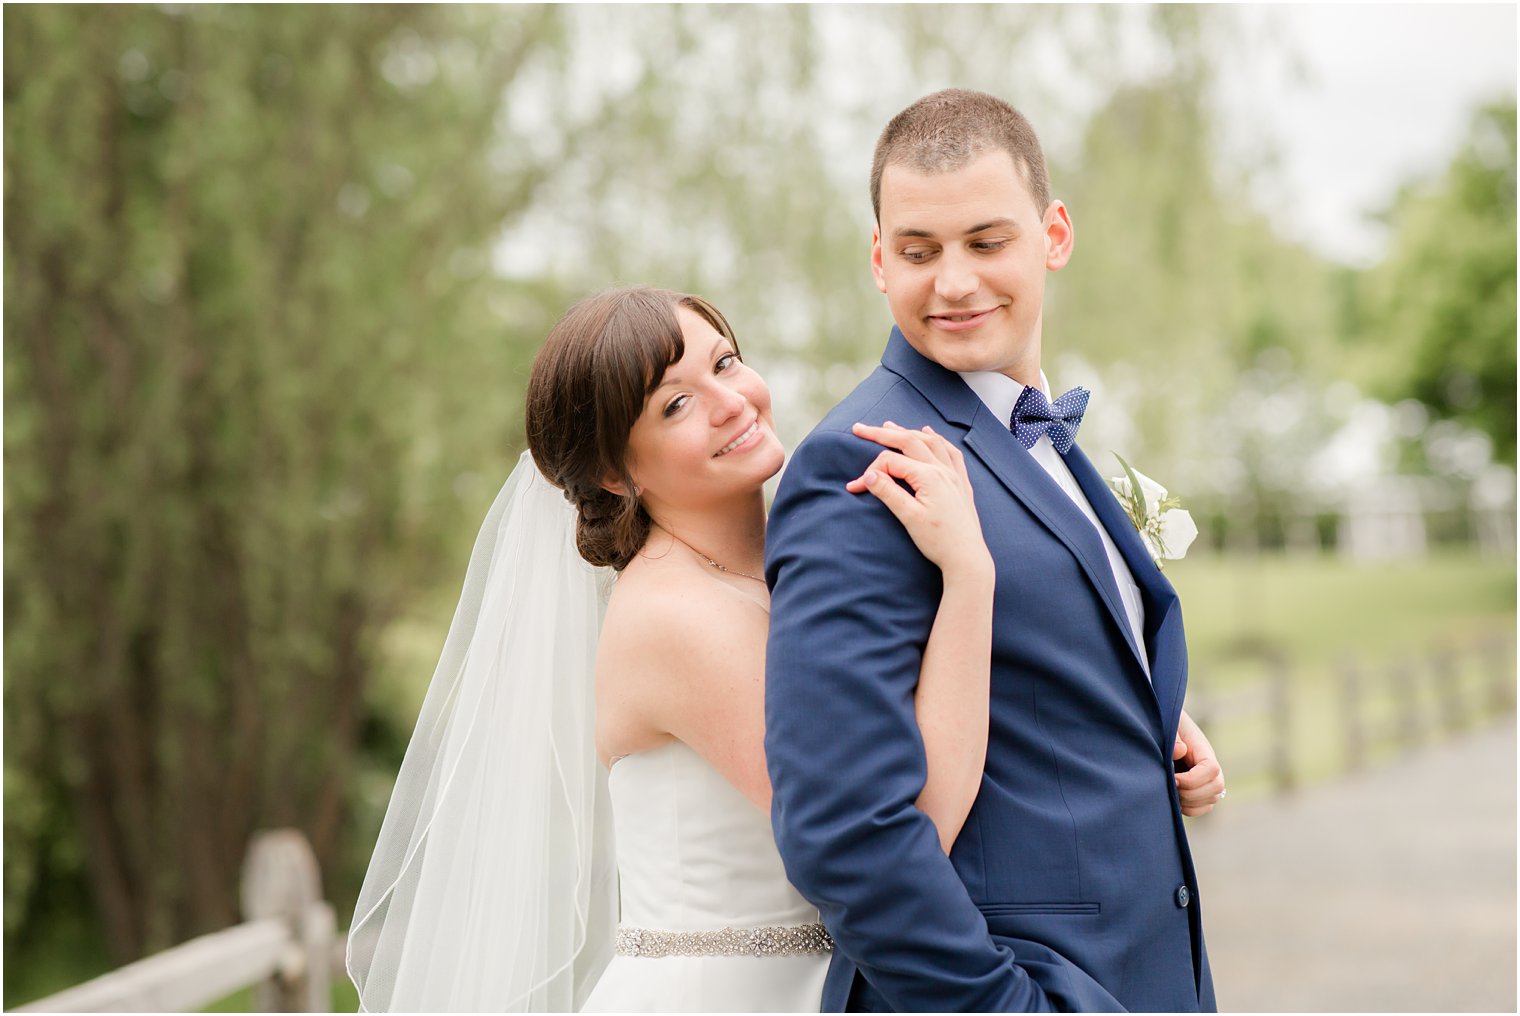 Formal bride and groom portraits at Windows on the Water at Frogbridge in Millstone NJ